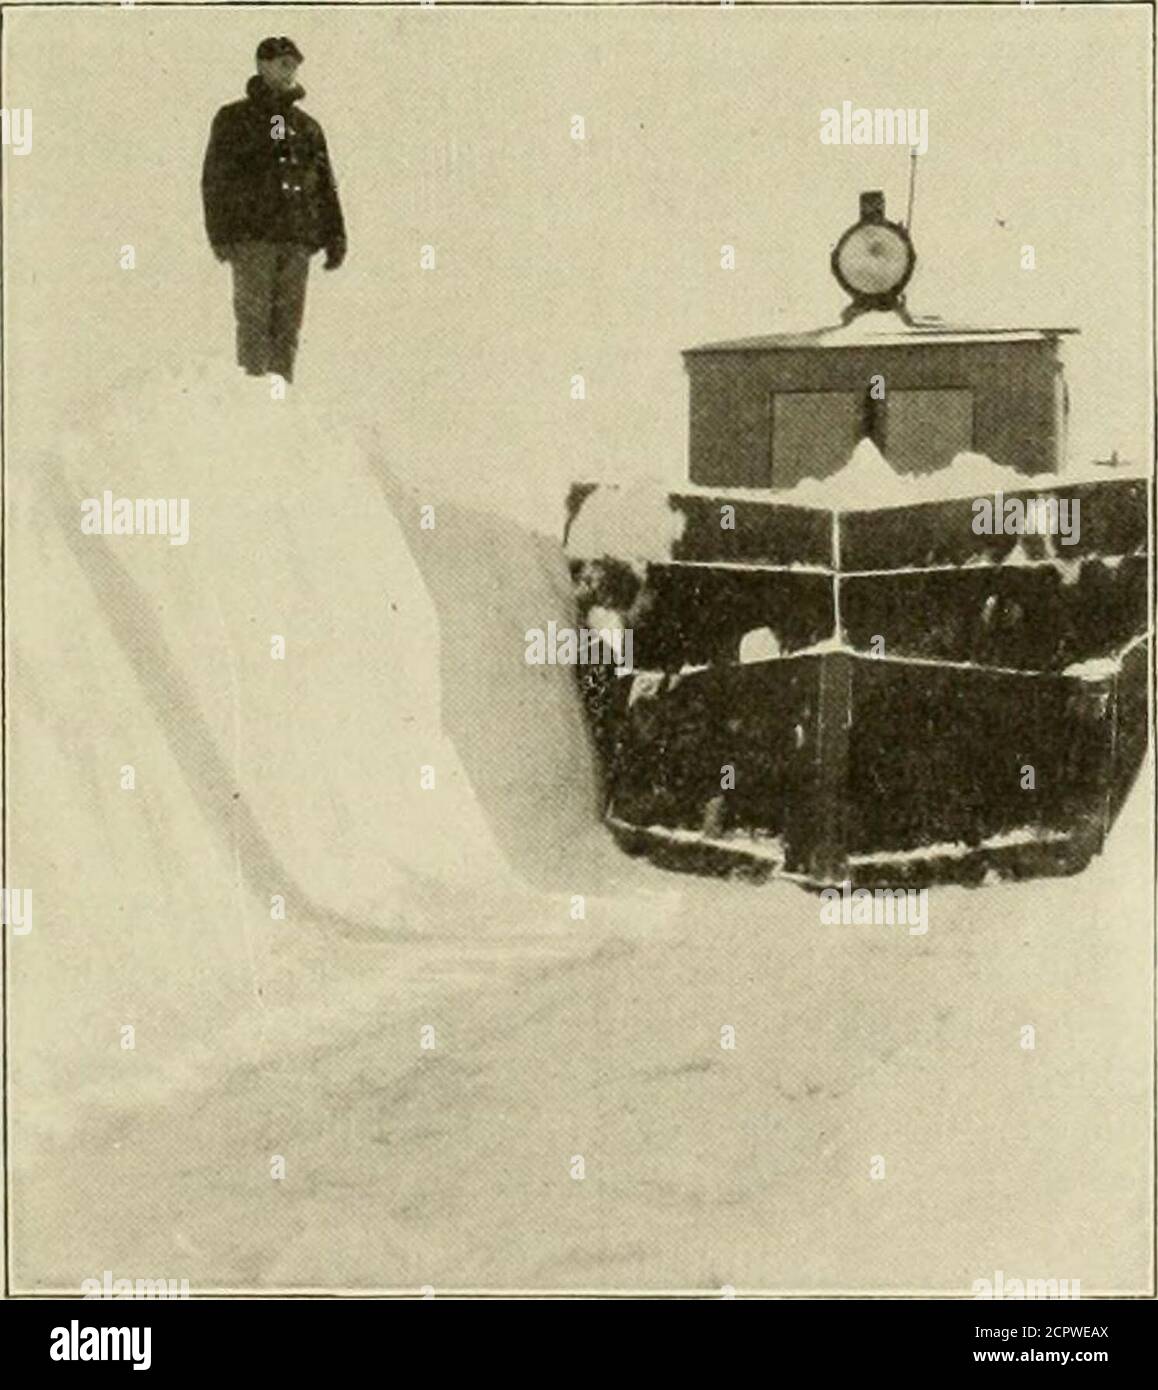 . The street railway review . ONE OF THE HEAVY DRIFTS ENCOUNTERED. a few roads in the northern states that have found the difficulties ofsnow fighting much the same as in the past. The winters of northern Wisconsin are particularly severe andthe electric roads of that region have had to fight a number ofheavy falls of snow. The accompanying illustrations present, in avery forcible manner, an idea of the difficulties with which theWinnebago Traction Co., Oshkosh, Wis., has had to contend. In. THE SNOW PLOW IN ACTION. his condition and environment with those of but a few years ago.When the old h Stock Photo